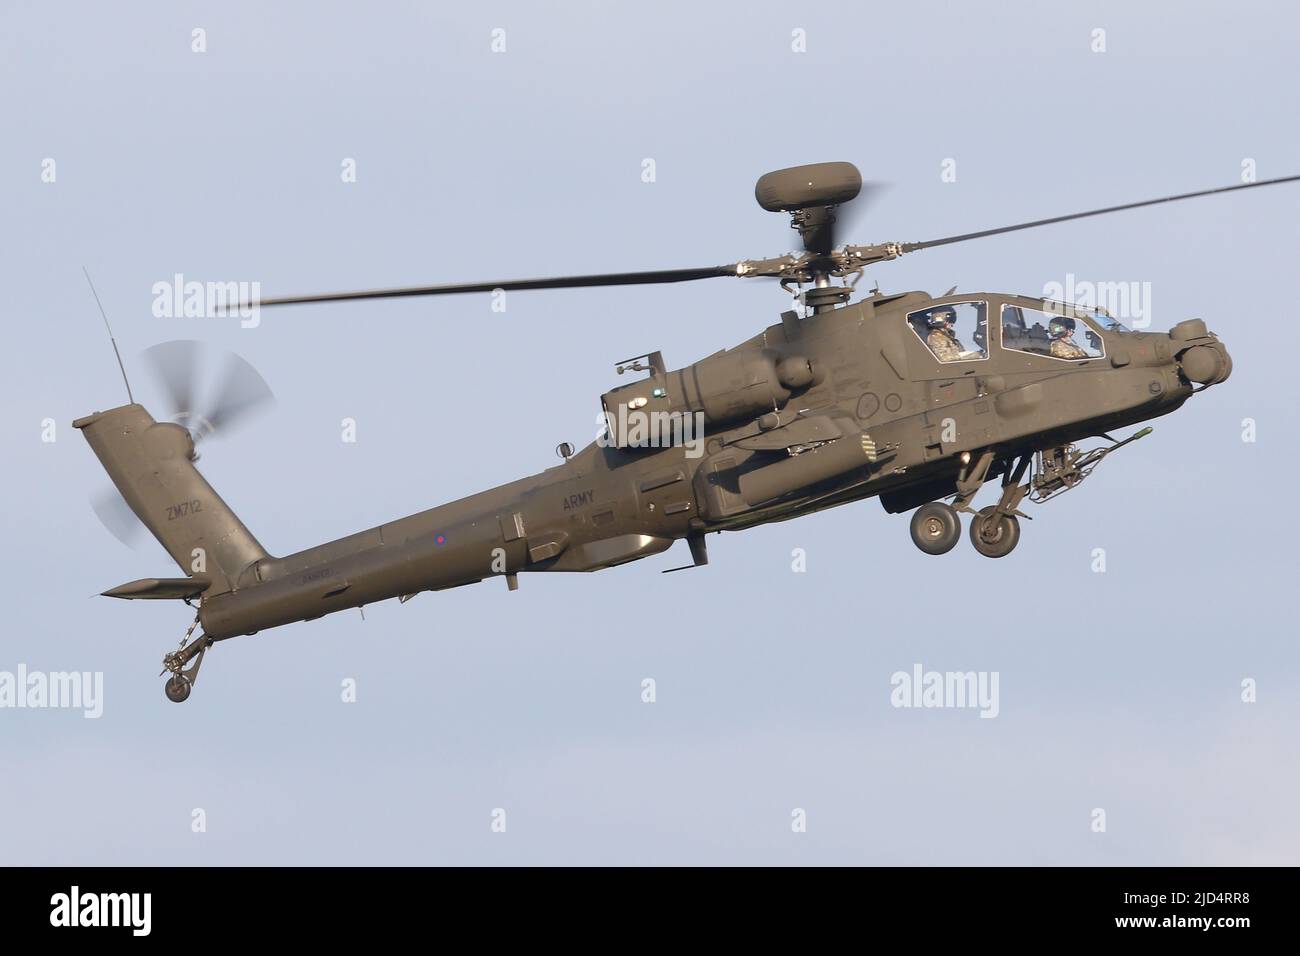 New Boeing built AH-64E Apache attack helicopter landing at Wattisham airfield. Stock Photo